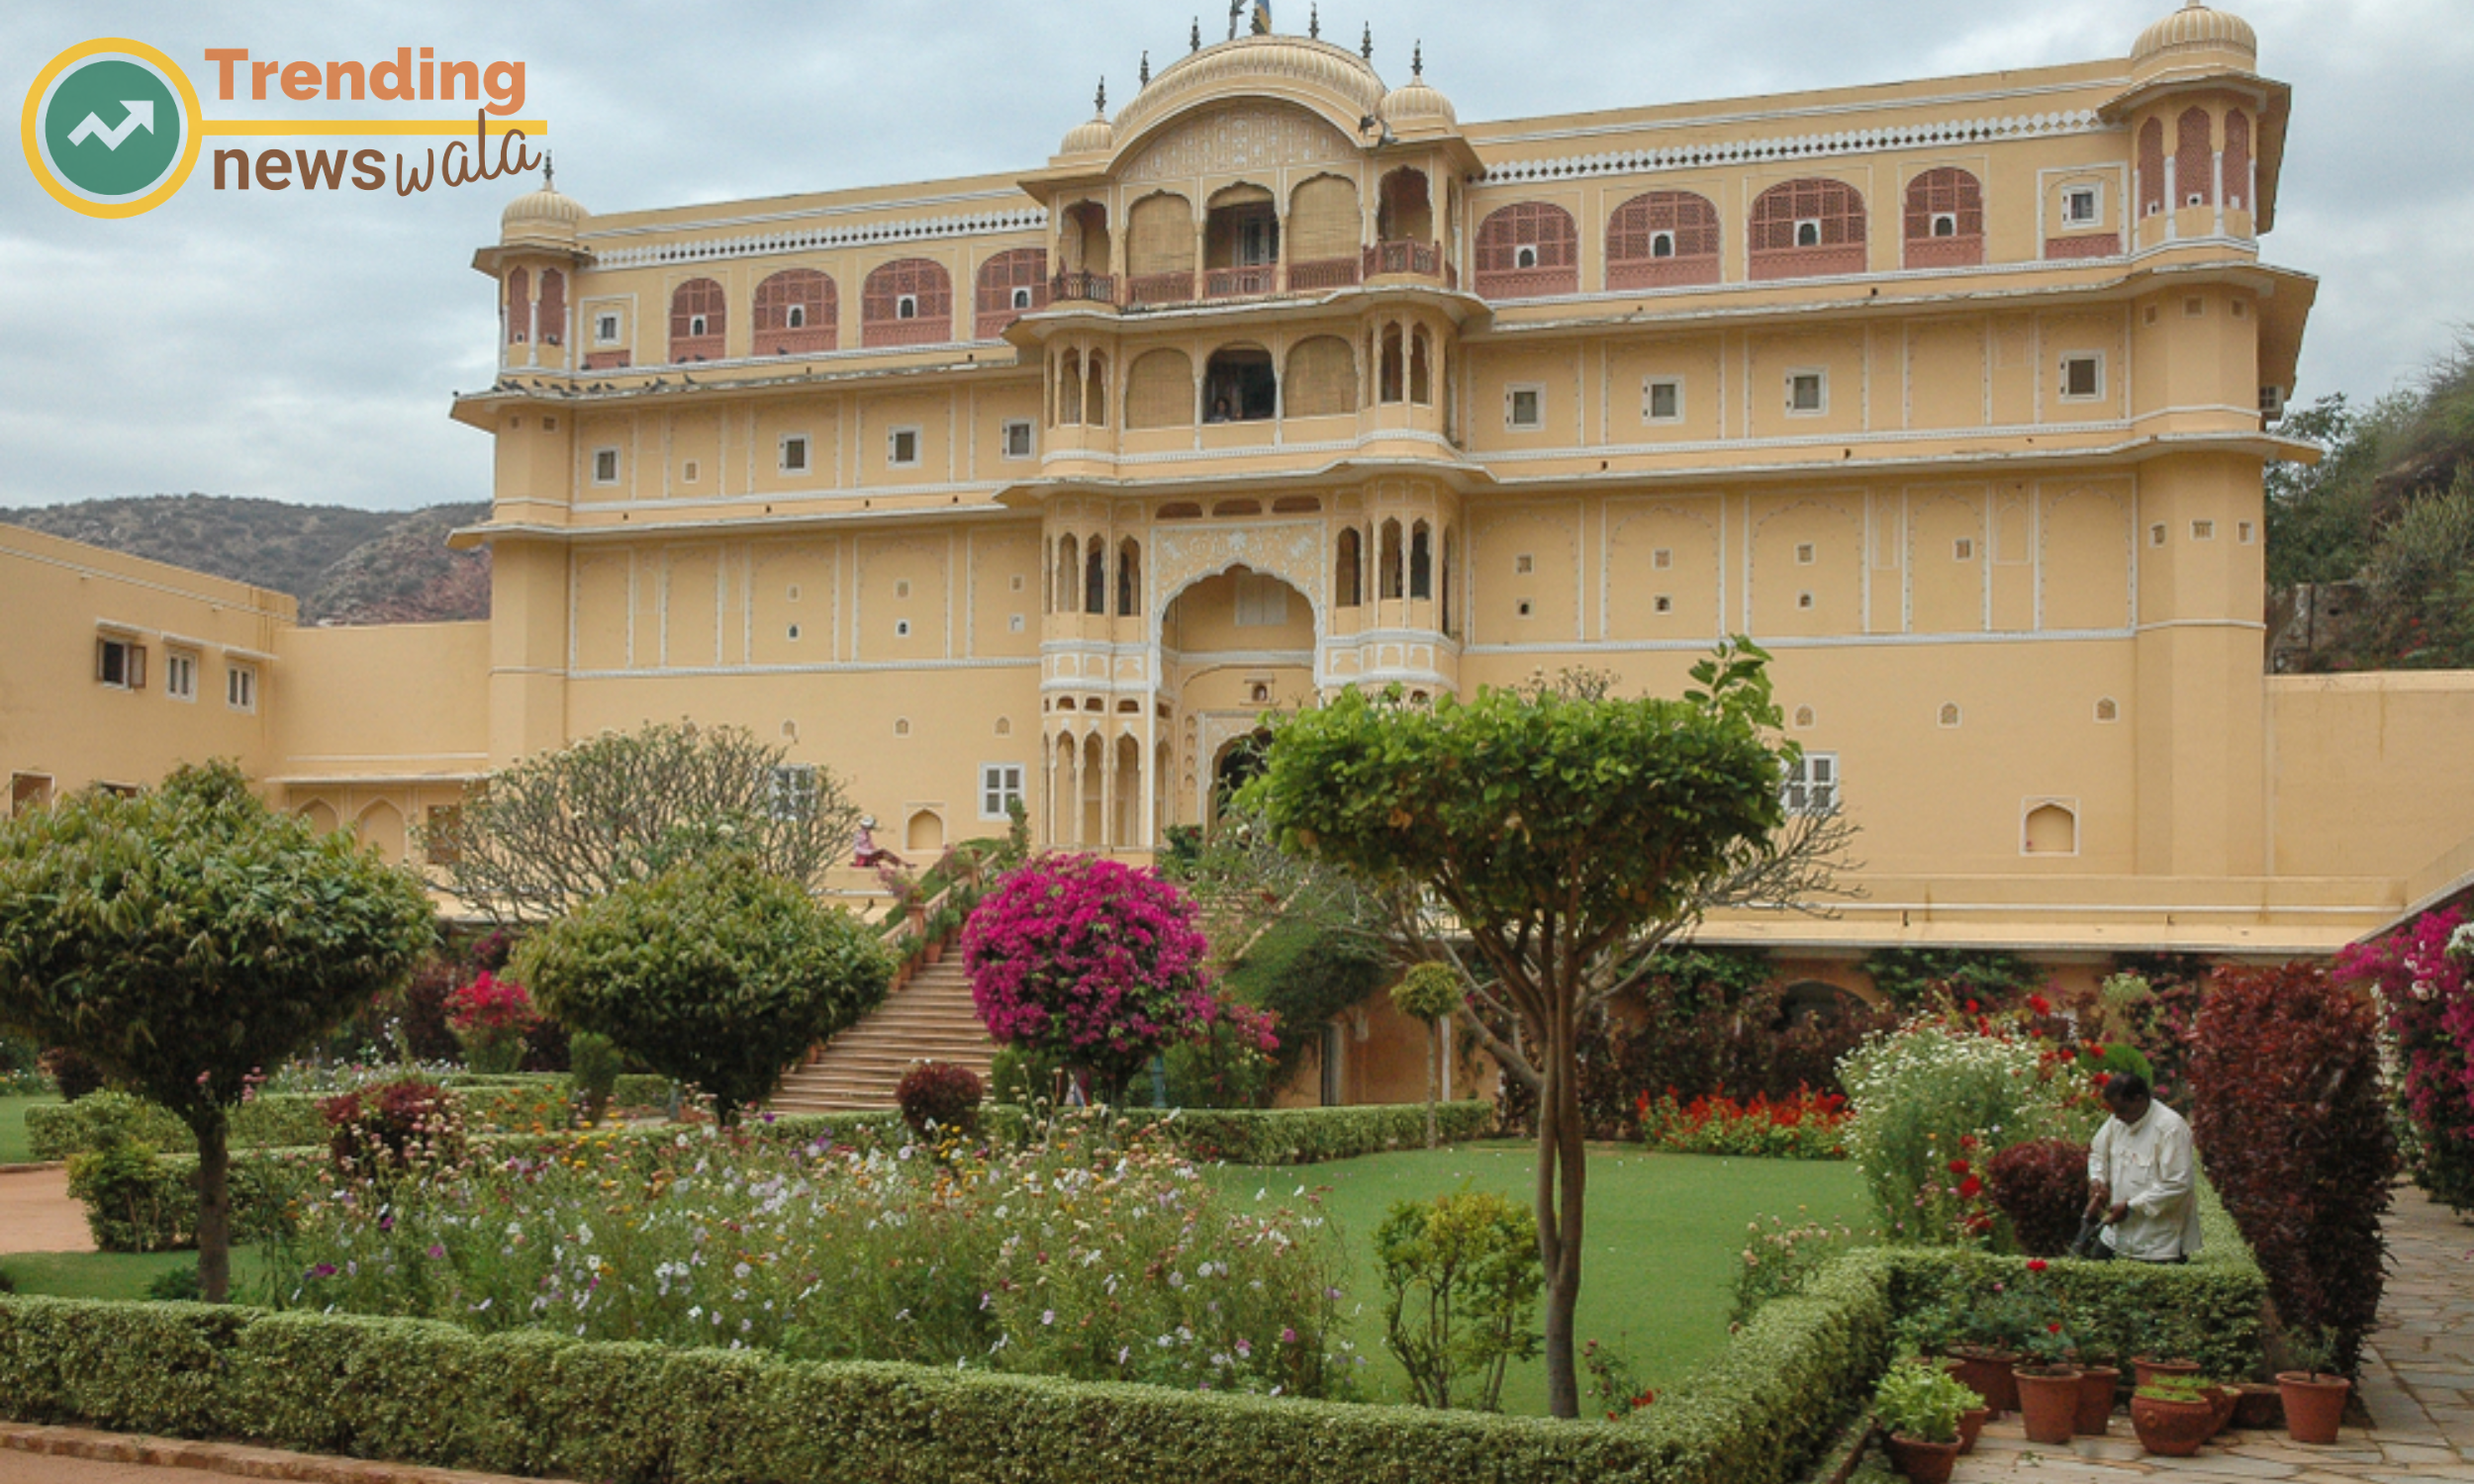 Samode Palace is a luxurious heritage hotel located near Jaipur